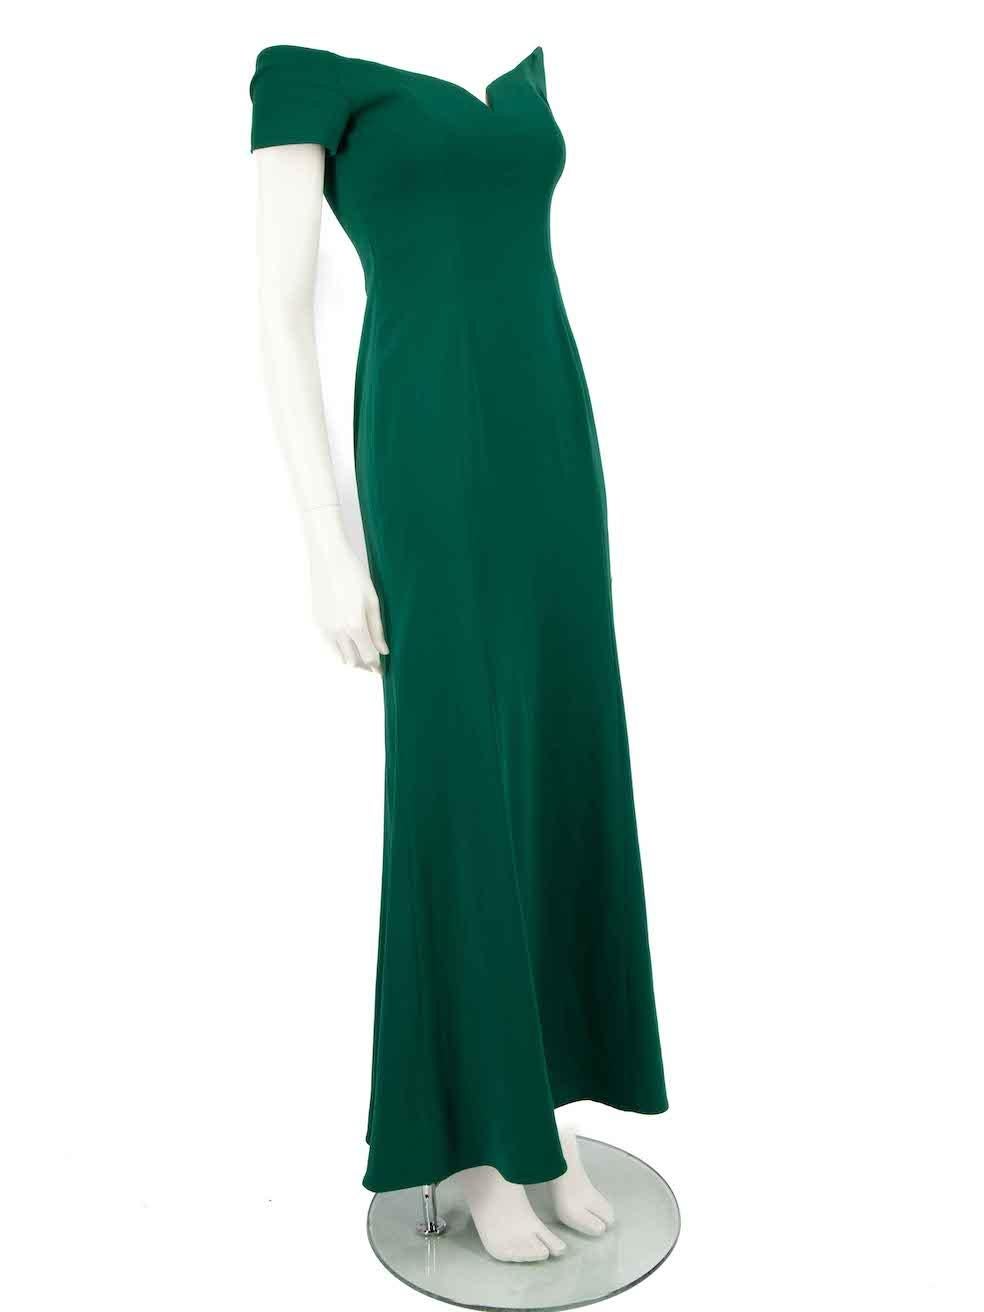 CONDITION is Very good. Hardly any visible wear to dress is evident on this used Badgley Mischka designer resale item.
 
 
 
 Details
 
 
 Green
 
 Polyester
 
 Maxi gown
 
 Off shoulder
 
 Sweetheart neckline
 
 Back zip closure with hook and eye
